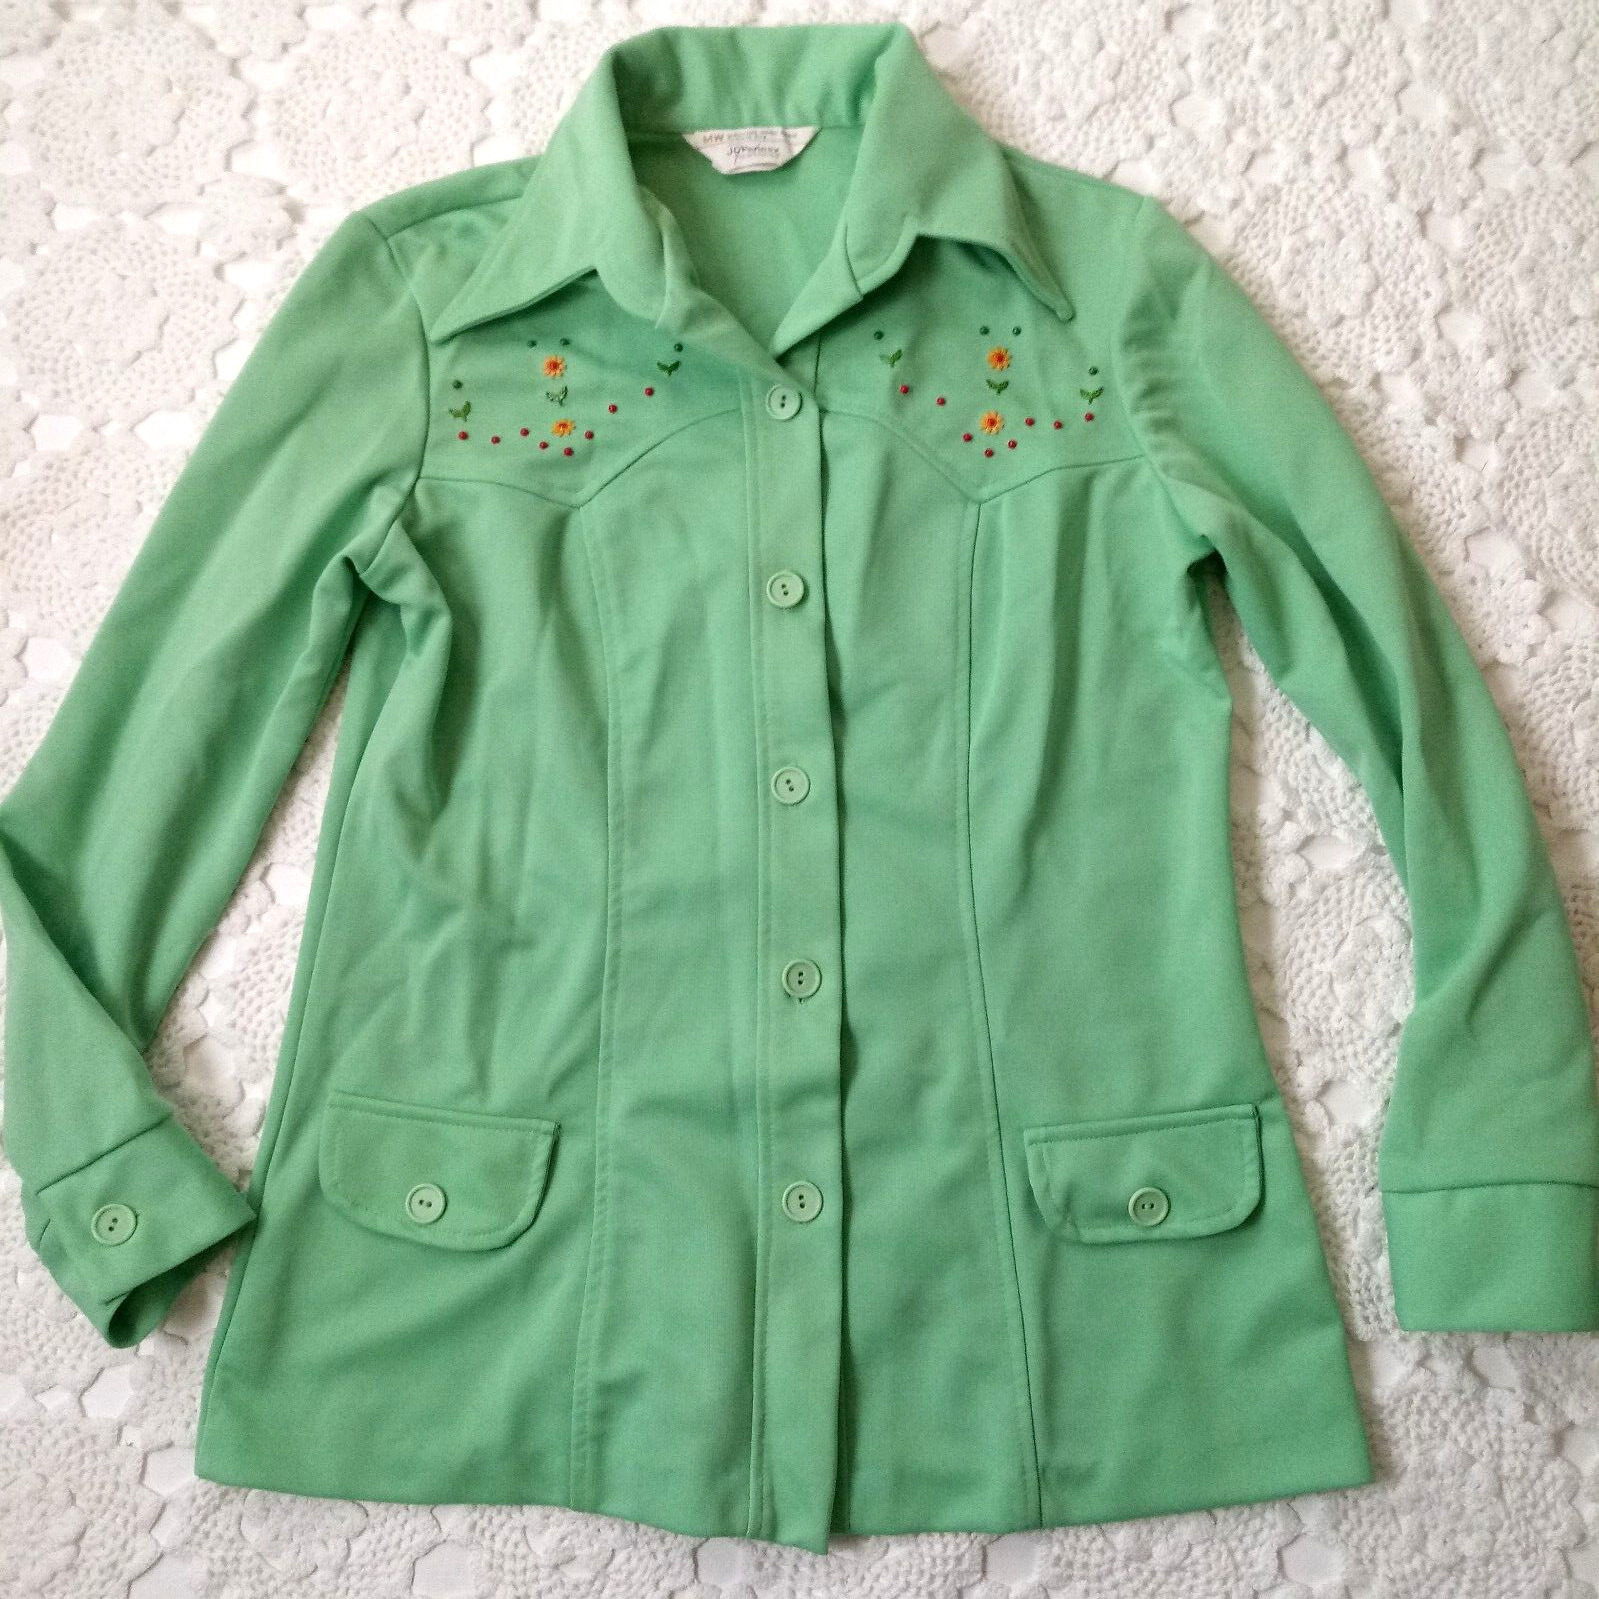 Vtg 70s JCPenney Jacket Shacket Green Western Beaded Floral Stitch Large Women